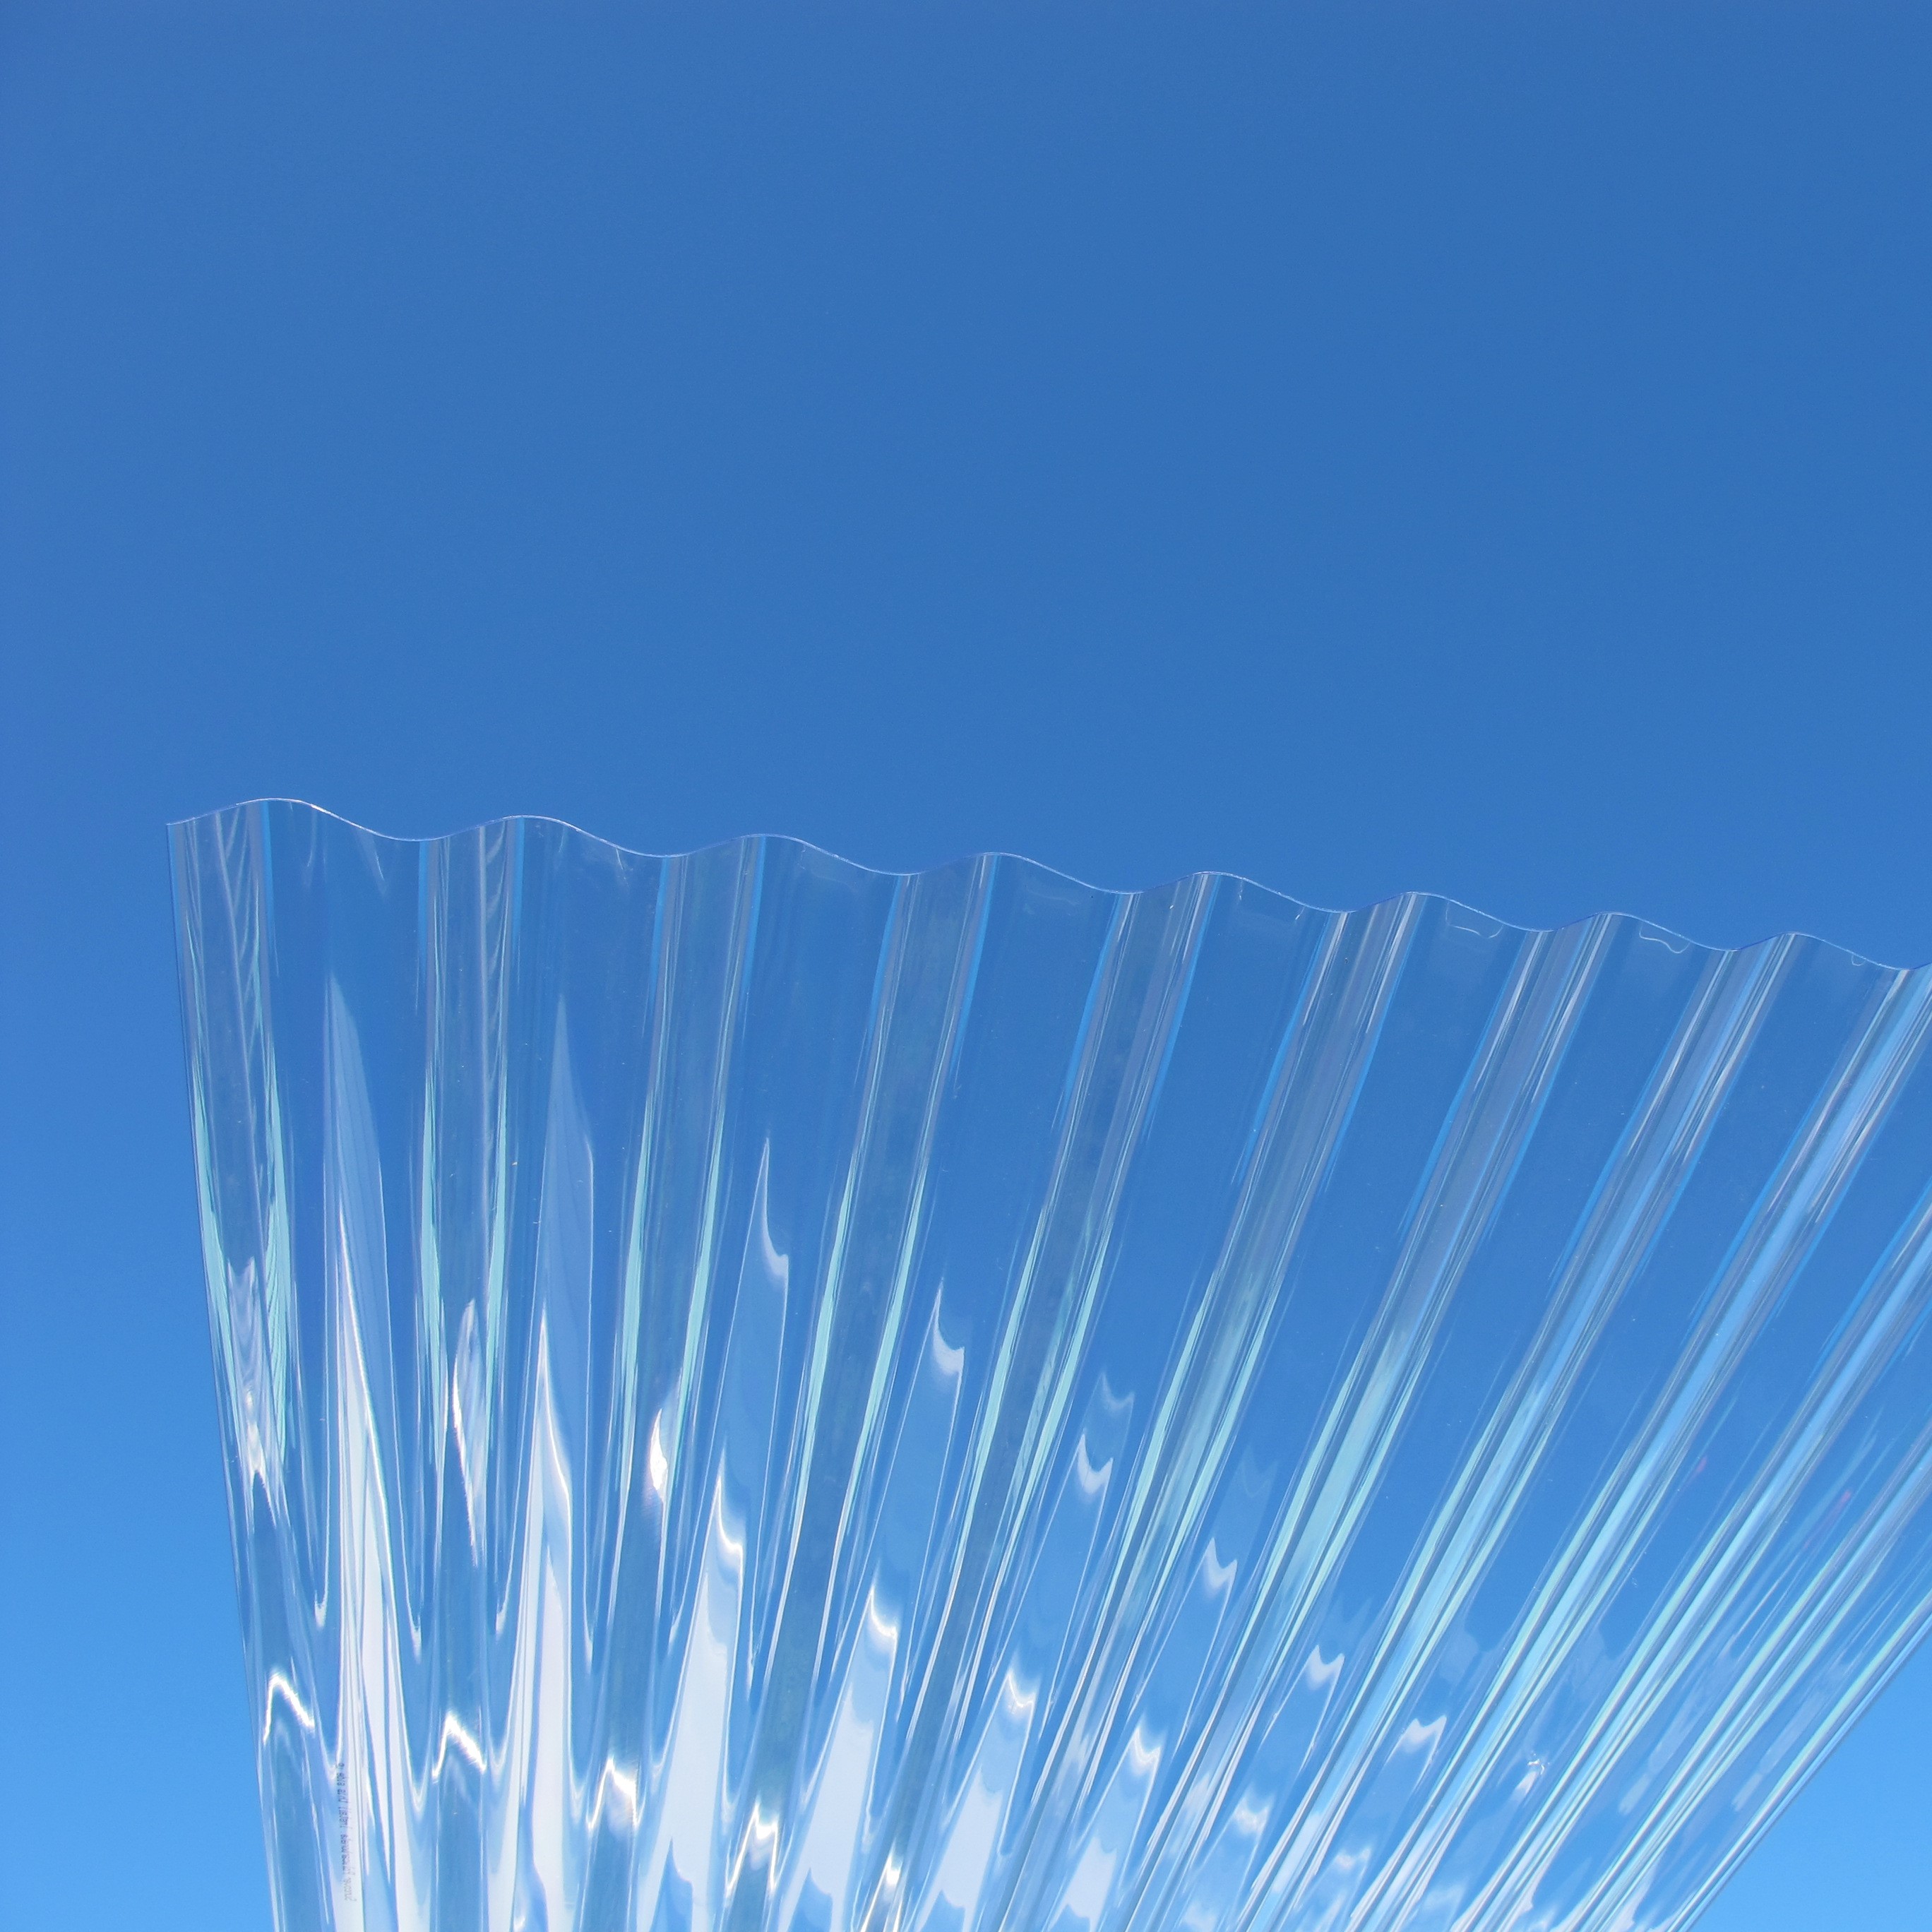 Corrugated Plastic Roofing Nz, Corrugated Clear Plastic